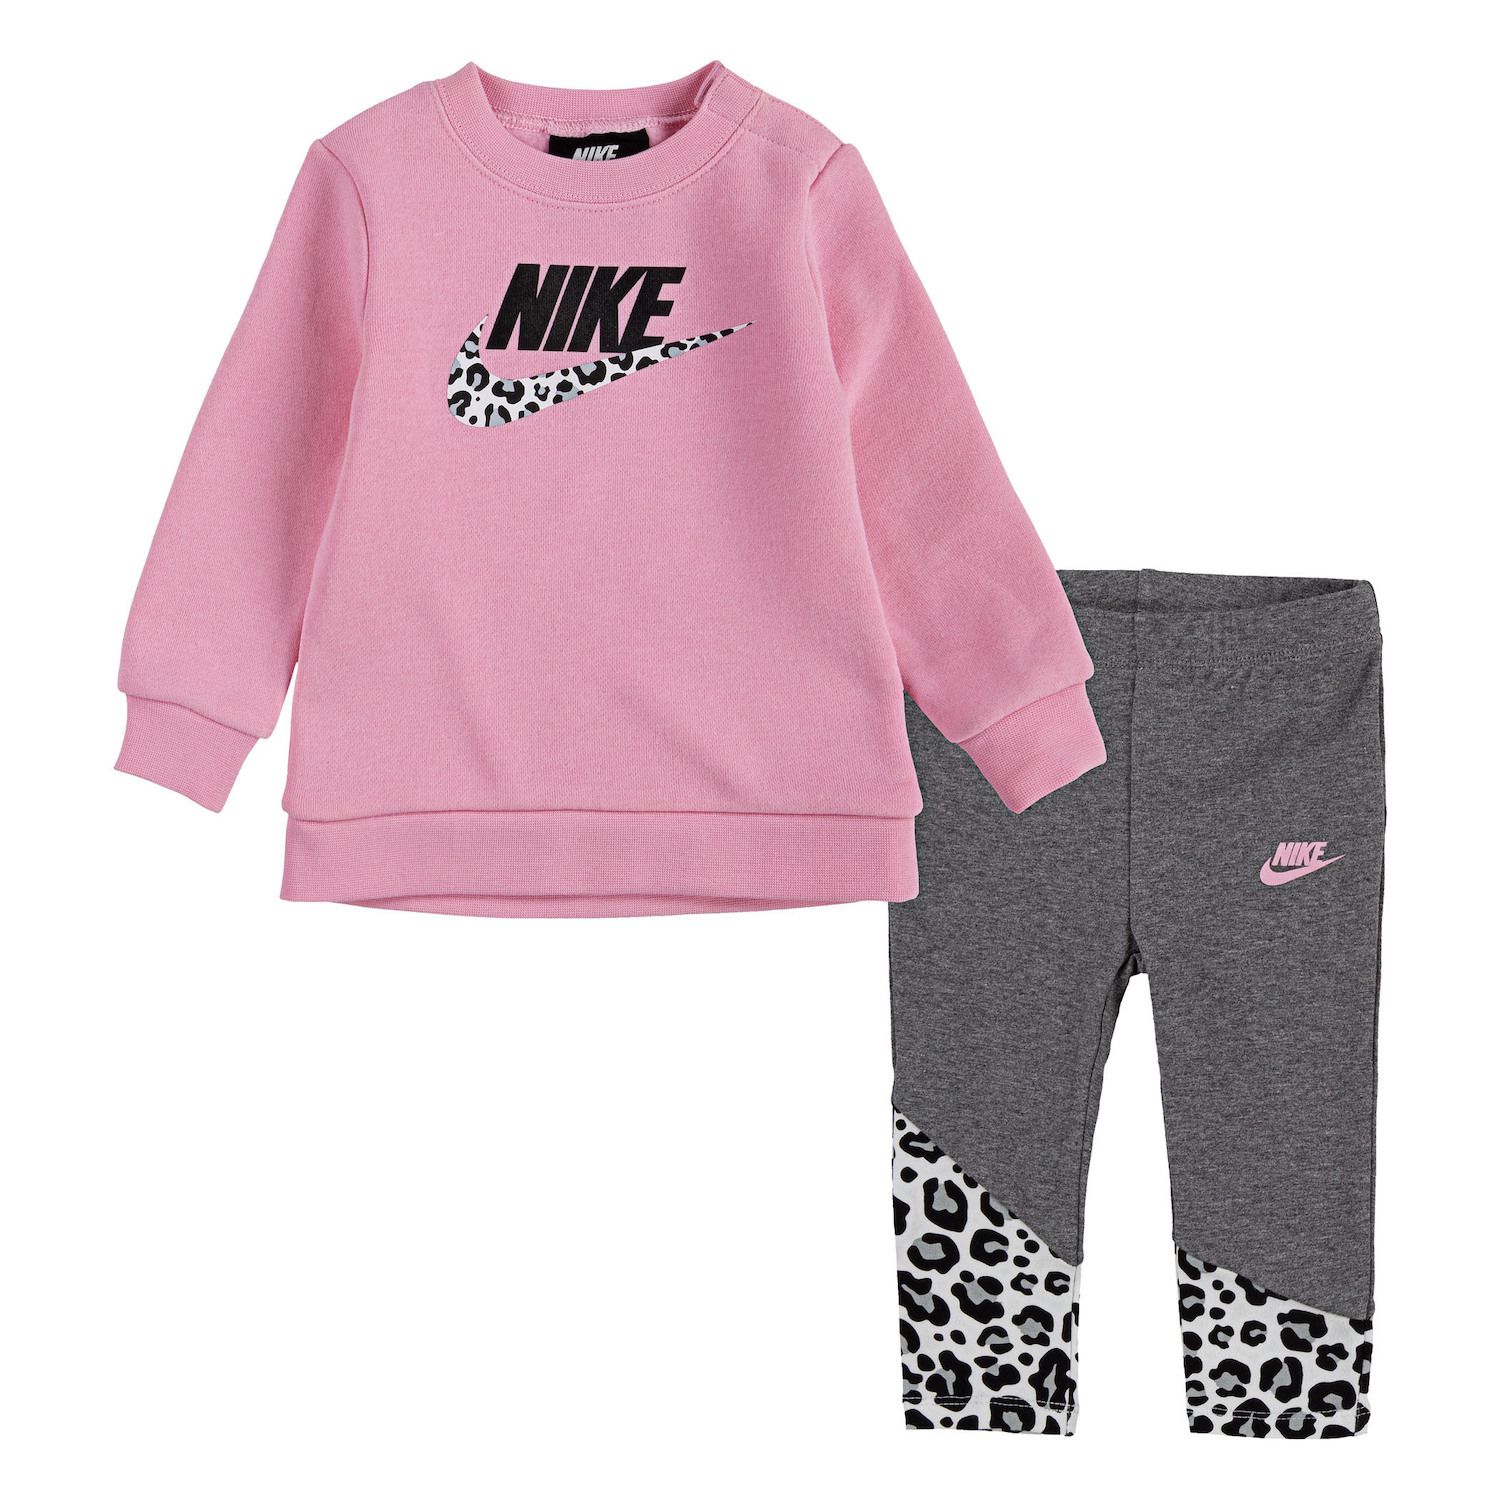 5t nike girl clothes cheap online